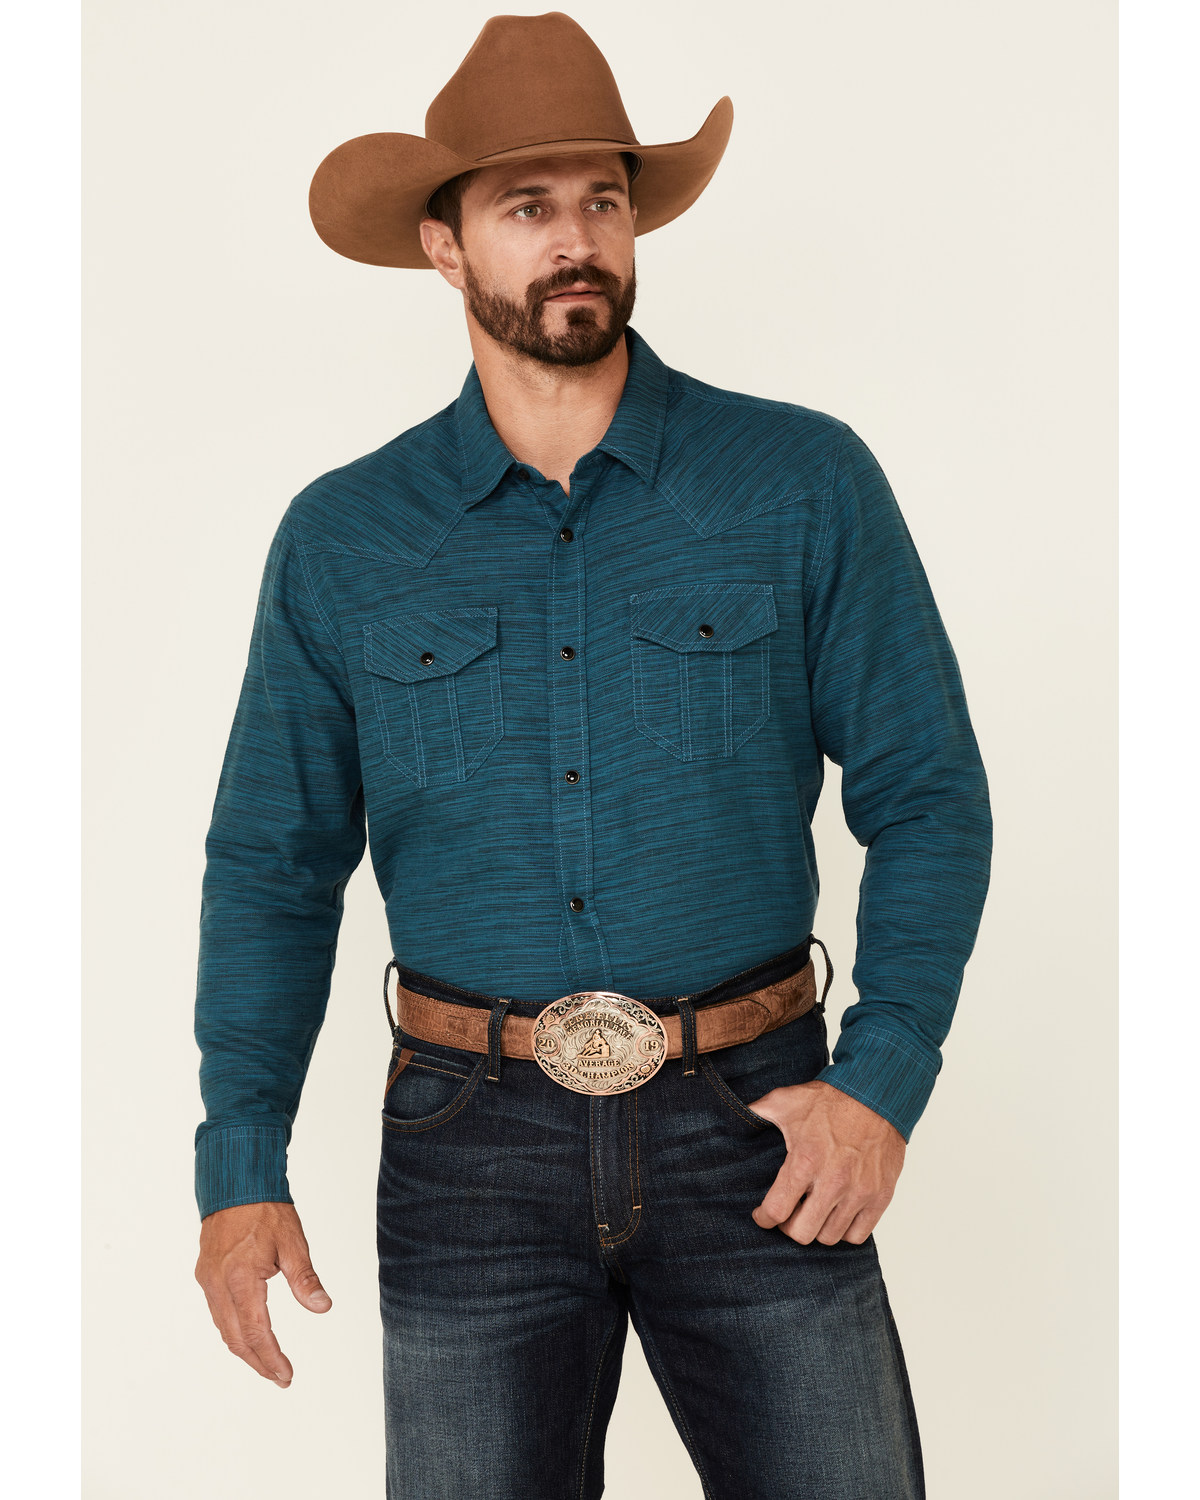 Cody James Men's Ride On Solid Long Sleeve Snap Western Shirt